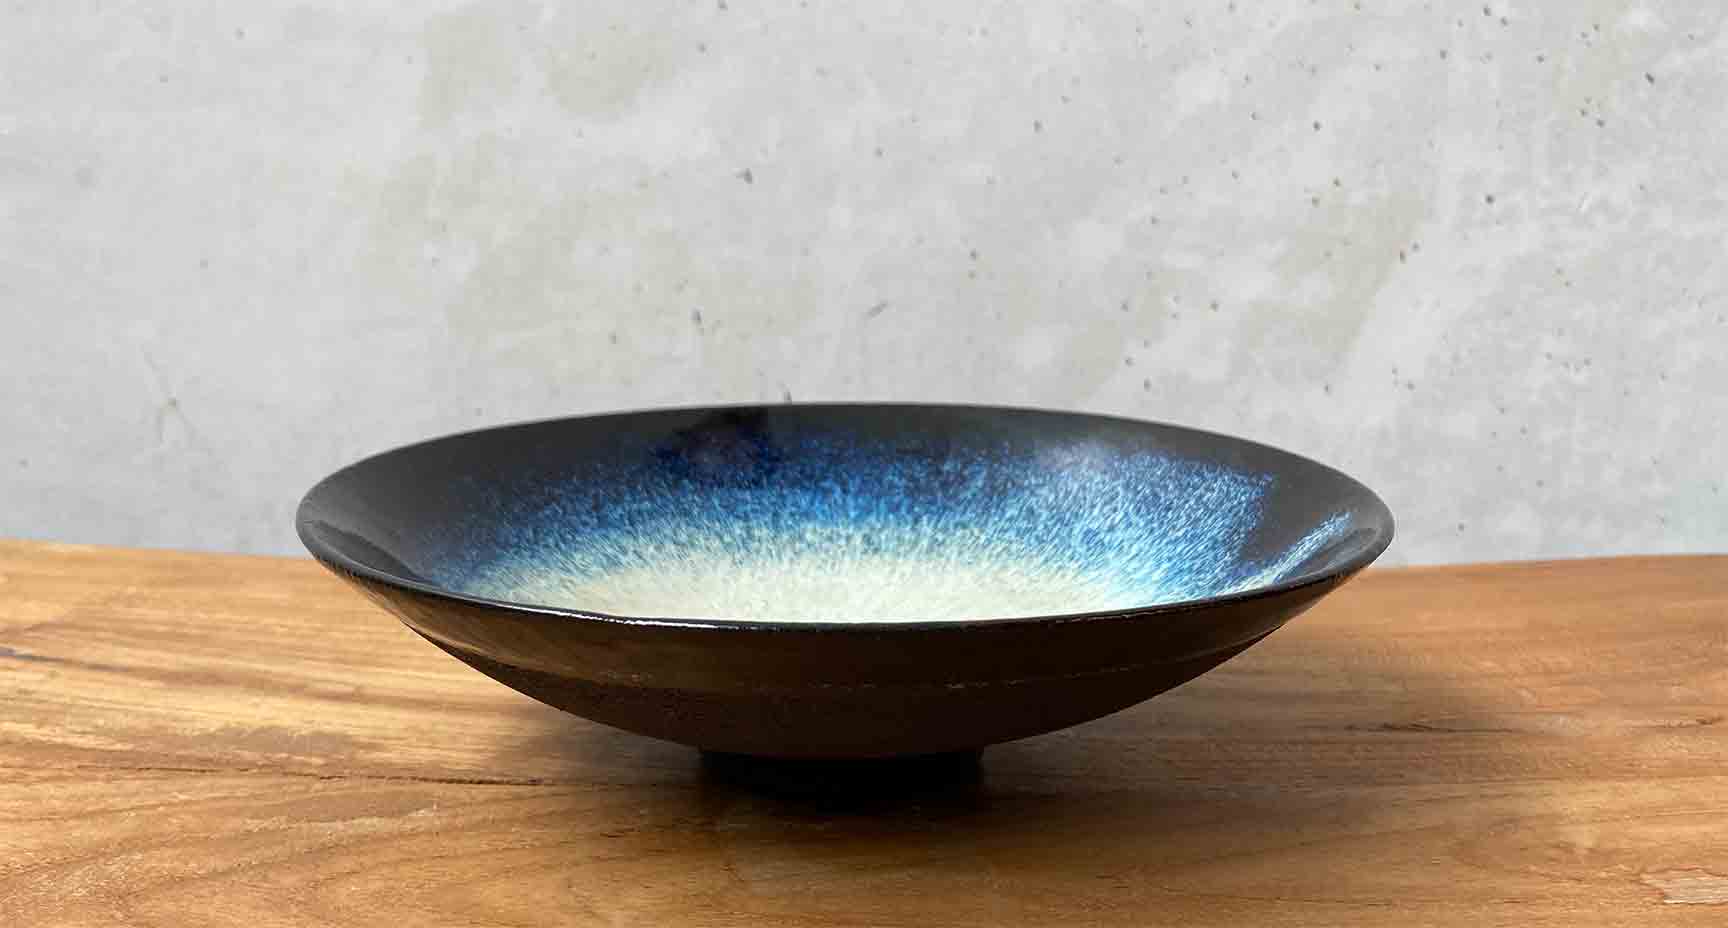 Alays in love with the siplicity of this simple footed bowl that will raise your vibe!